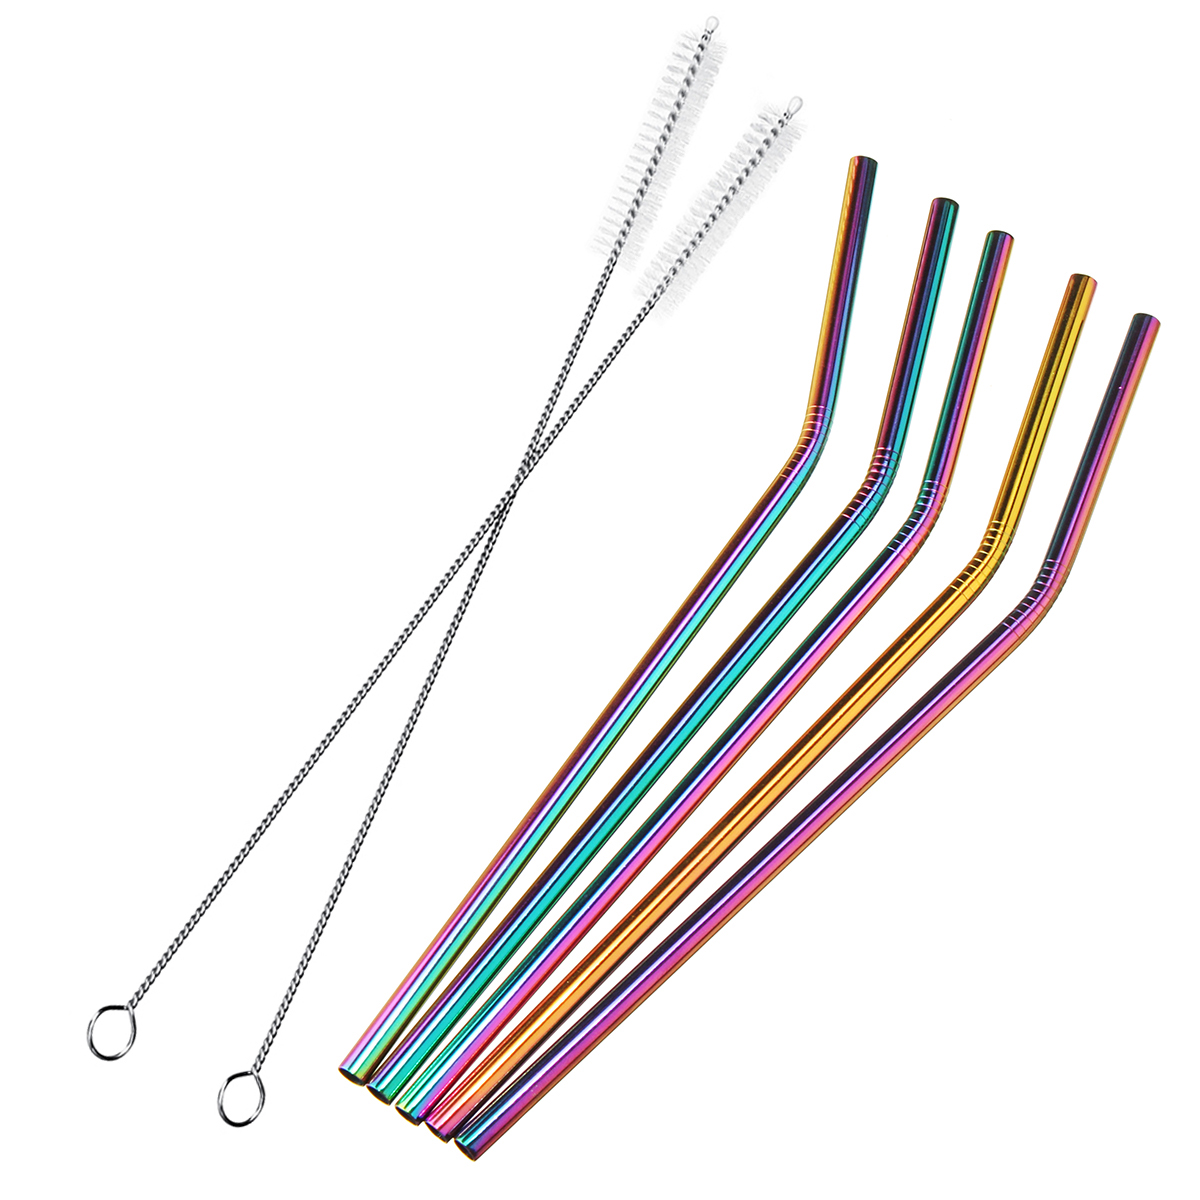 7PCS Premium Stainless Steel Metal Drinking Straw Reusable Straws Set With Cleaner Brushes 17